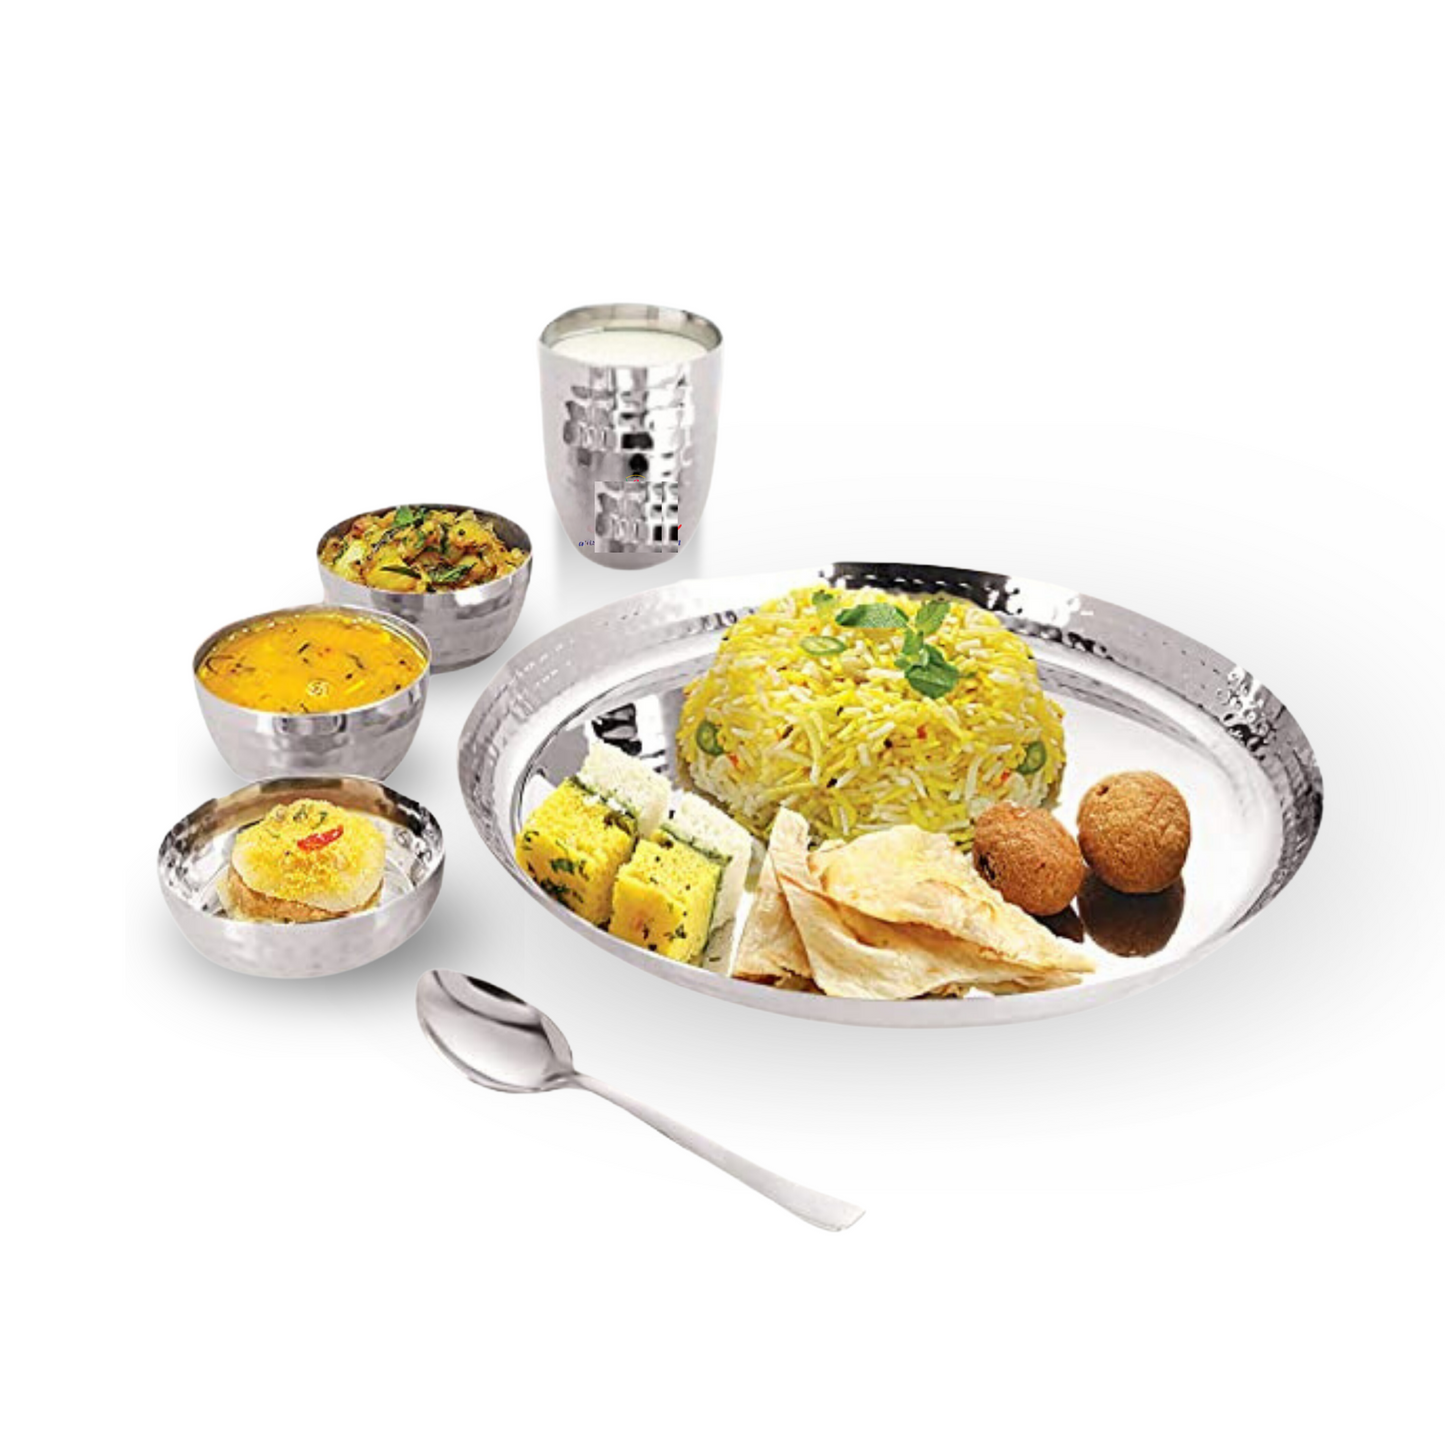 steel dinner set for kitchen 101 pieces | steel plates set of 4 | steel plates for kids | dinner set steel 151 pieces | lunch plates stainless steel | steel plates set of 2 | stainless steel plates | steel plate set | steel name plates for home | steel plates set of 6 dinner plate | steel plates set of 6 dinner plate | steel thali with compartments | vinod stainless steel dinner set | plates steel | steel plates for lunch | steel dinner set of 6 | small steel plates | bhojan thali steel 6 big size deep 